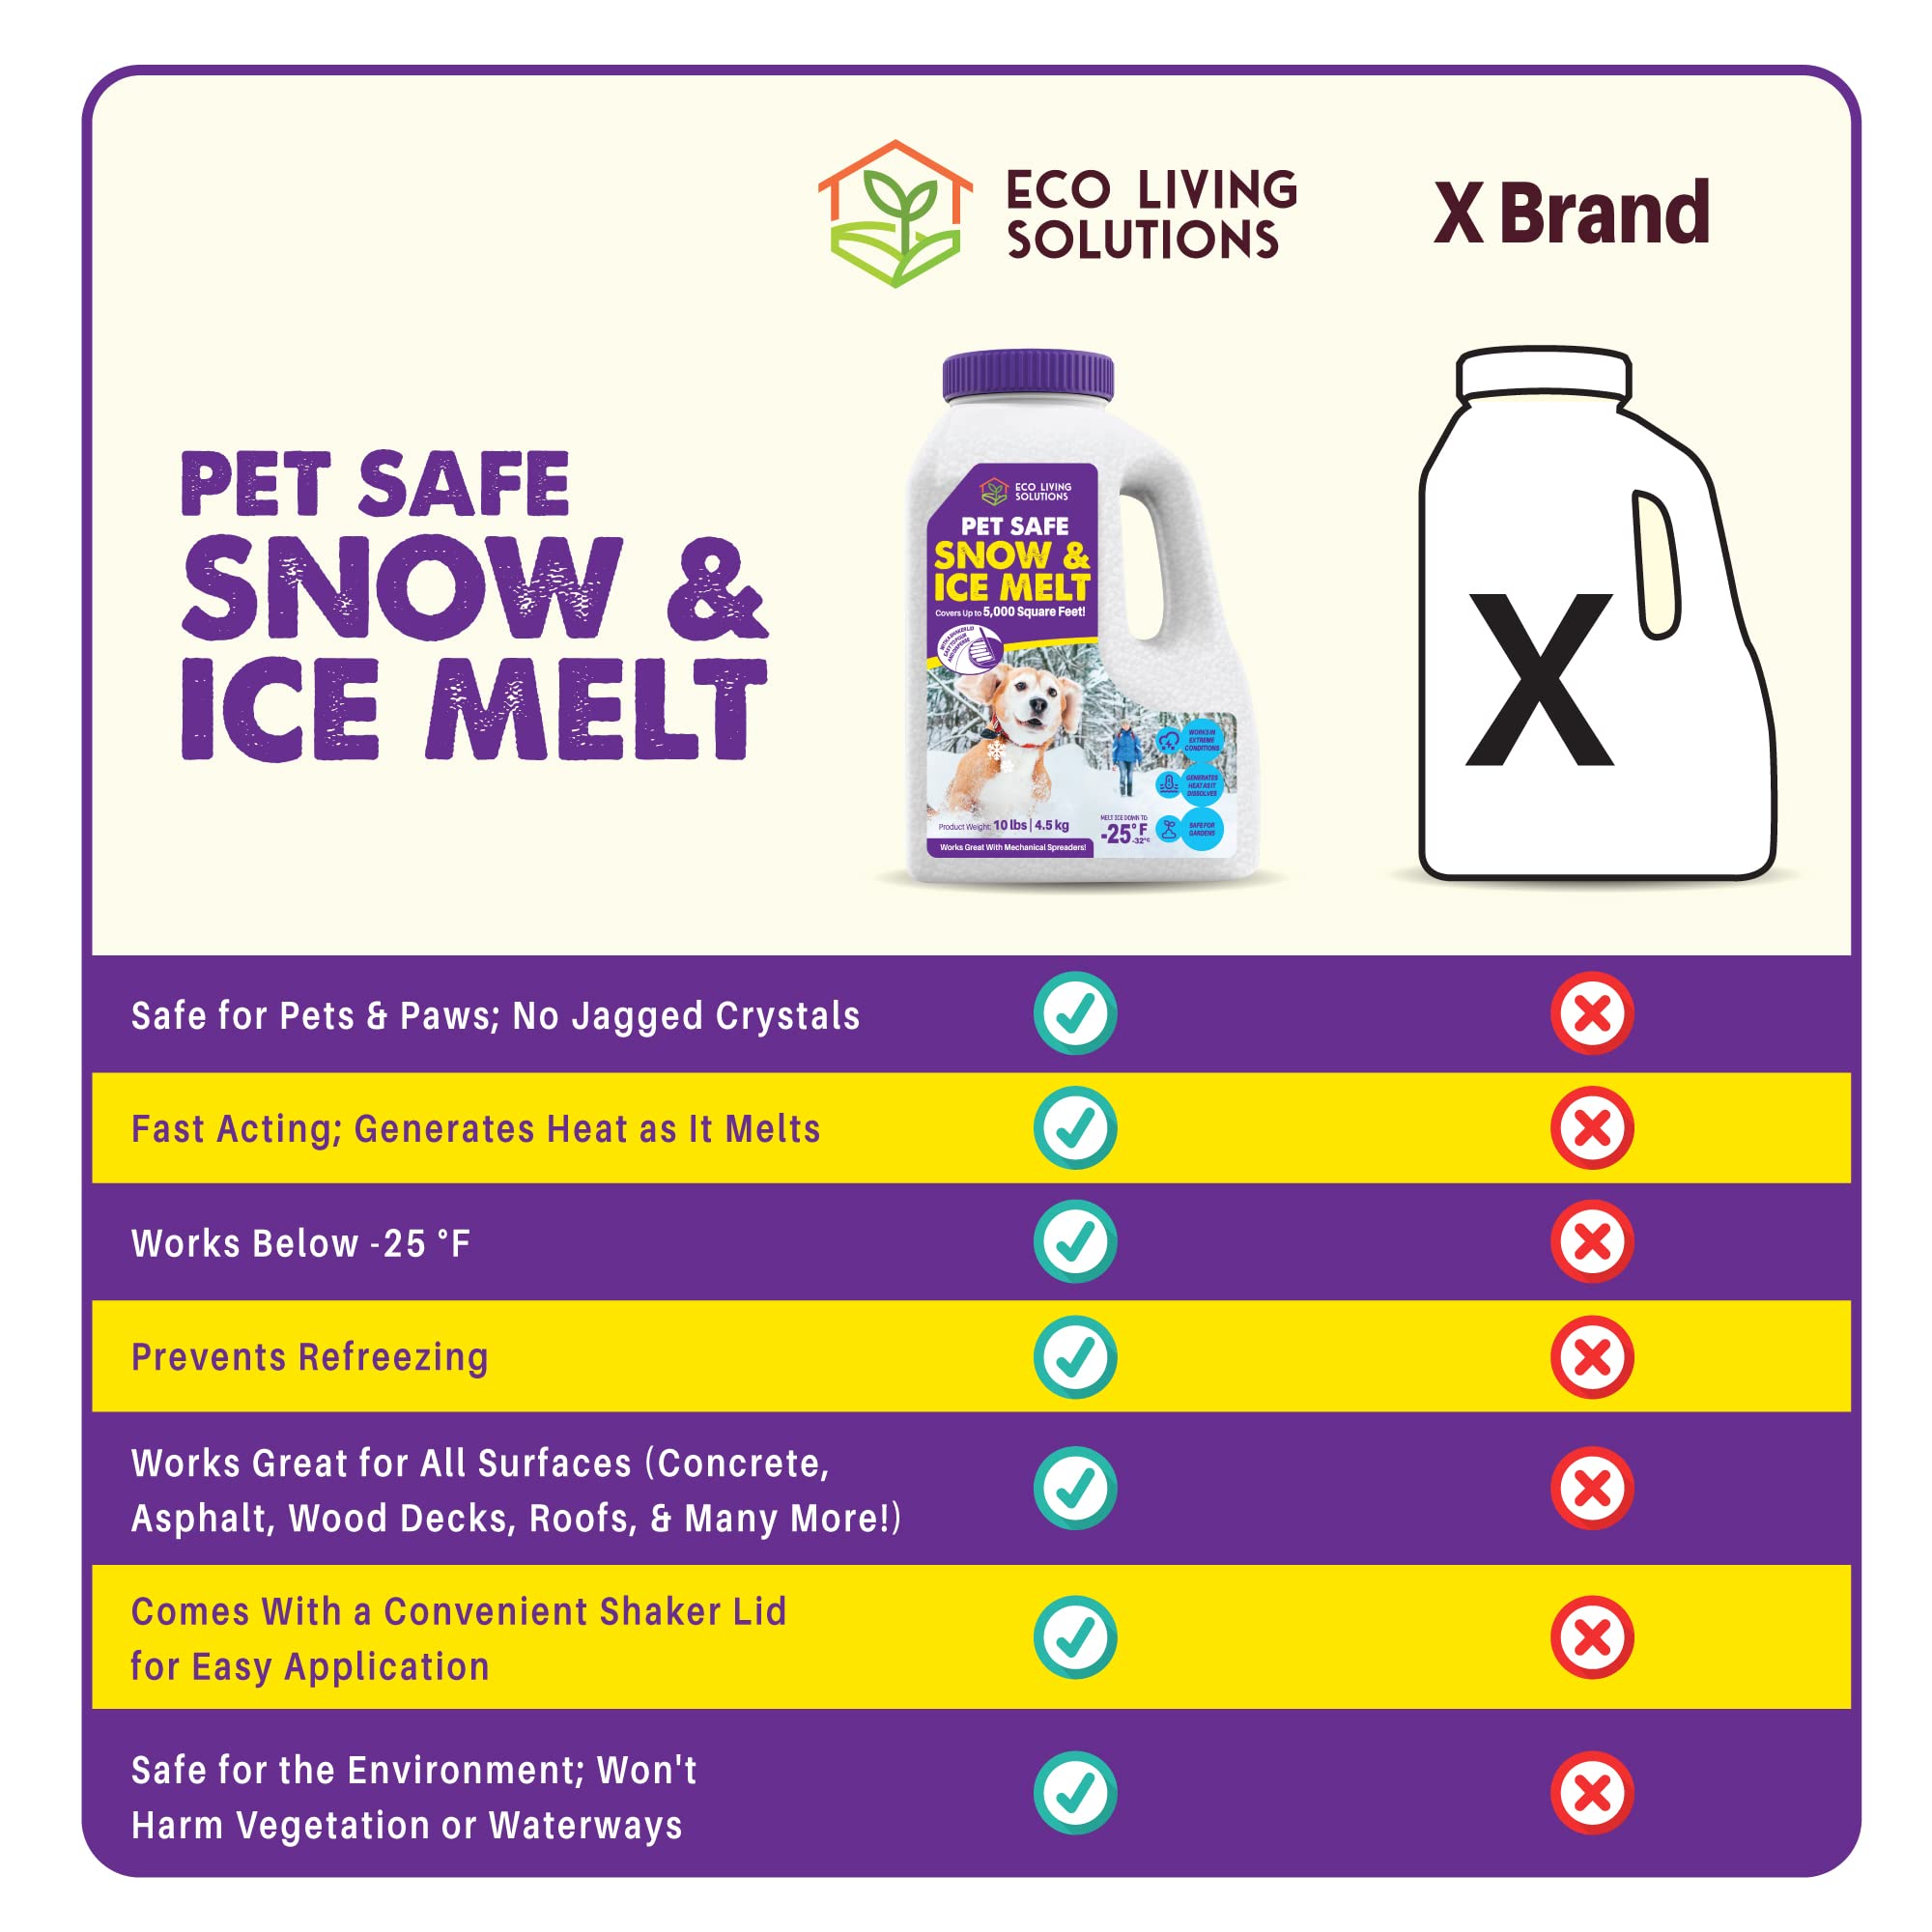 ECO GARDEN PRO PROFESSIONAL Pet Safe Snow & Ice Melt | Eco Living Solutions | Calcium Chloride | Works Under -25 °F | Safe for Concrete Driveway and Roof | 